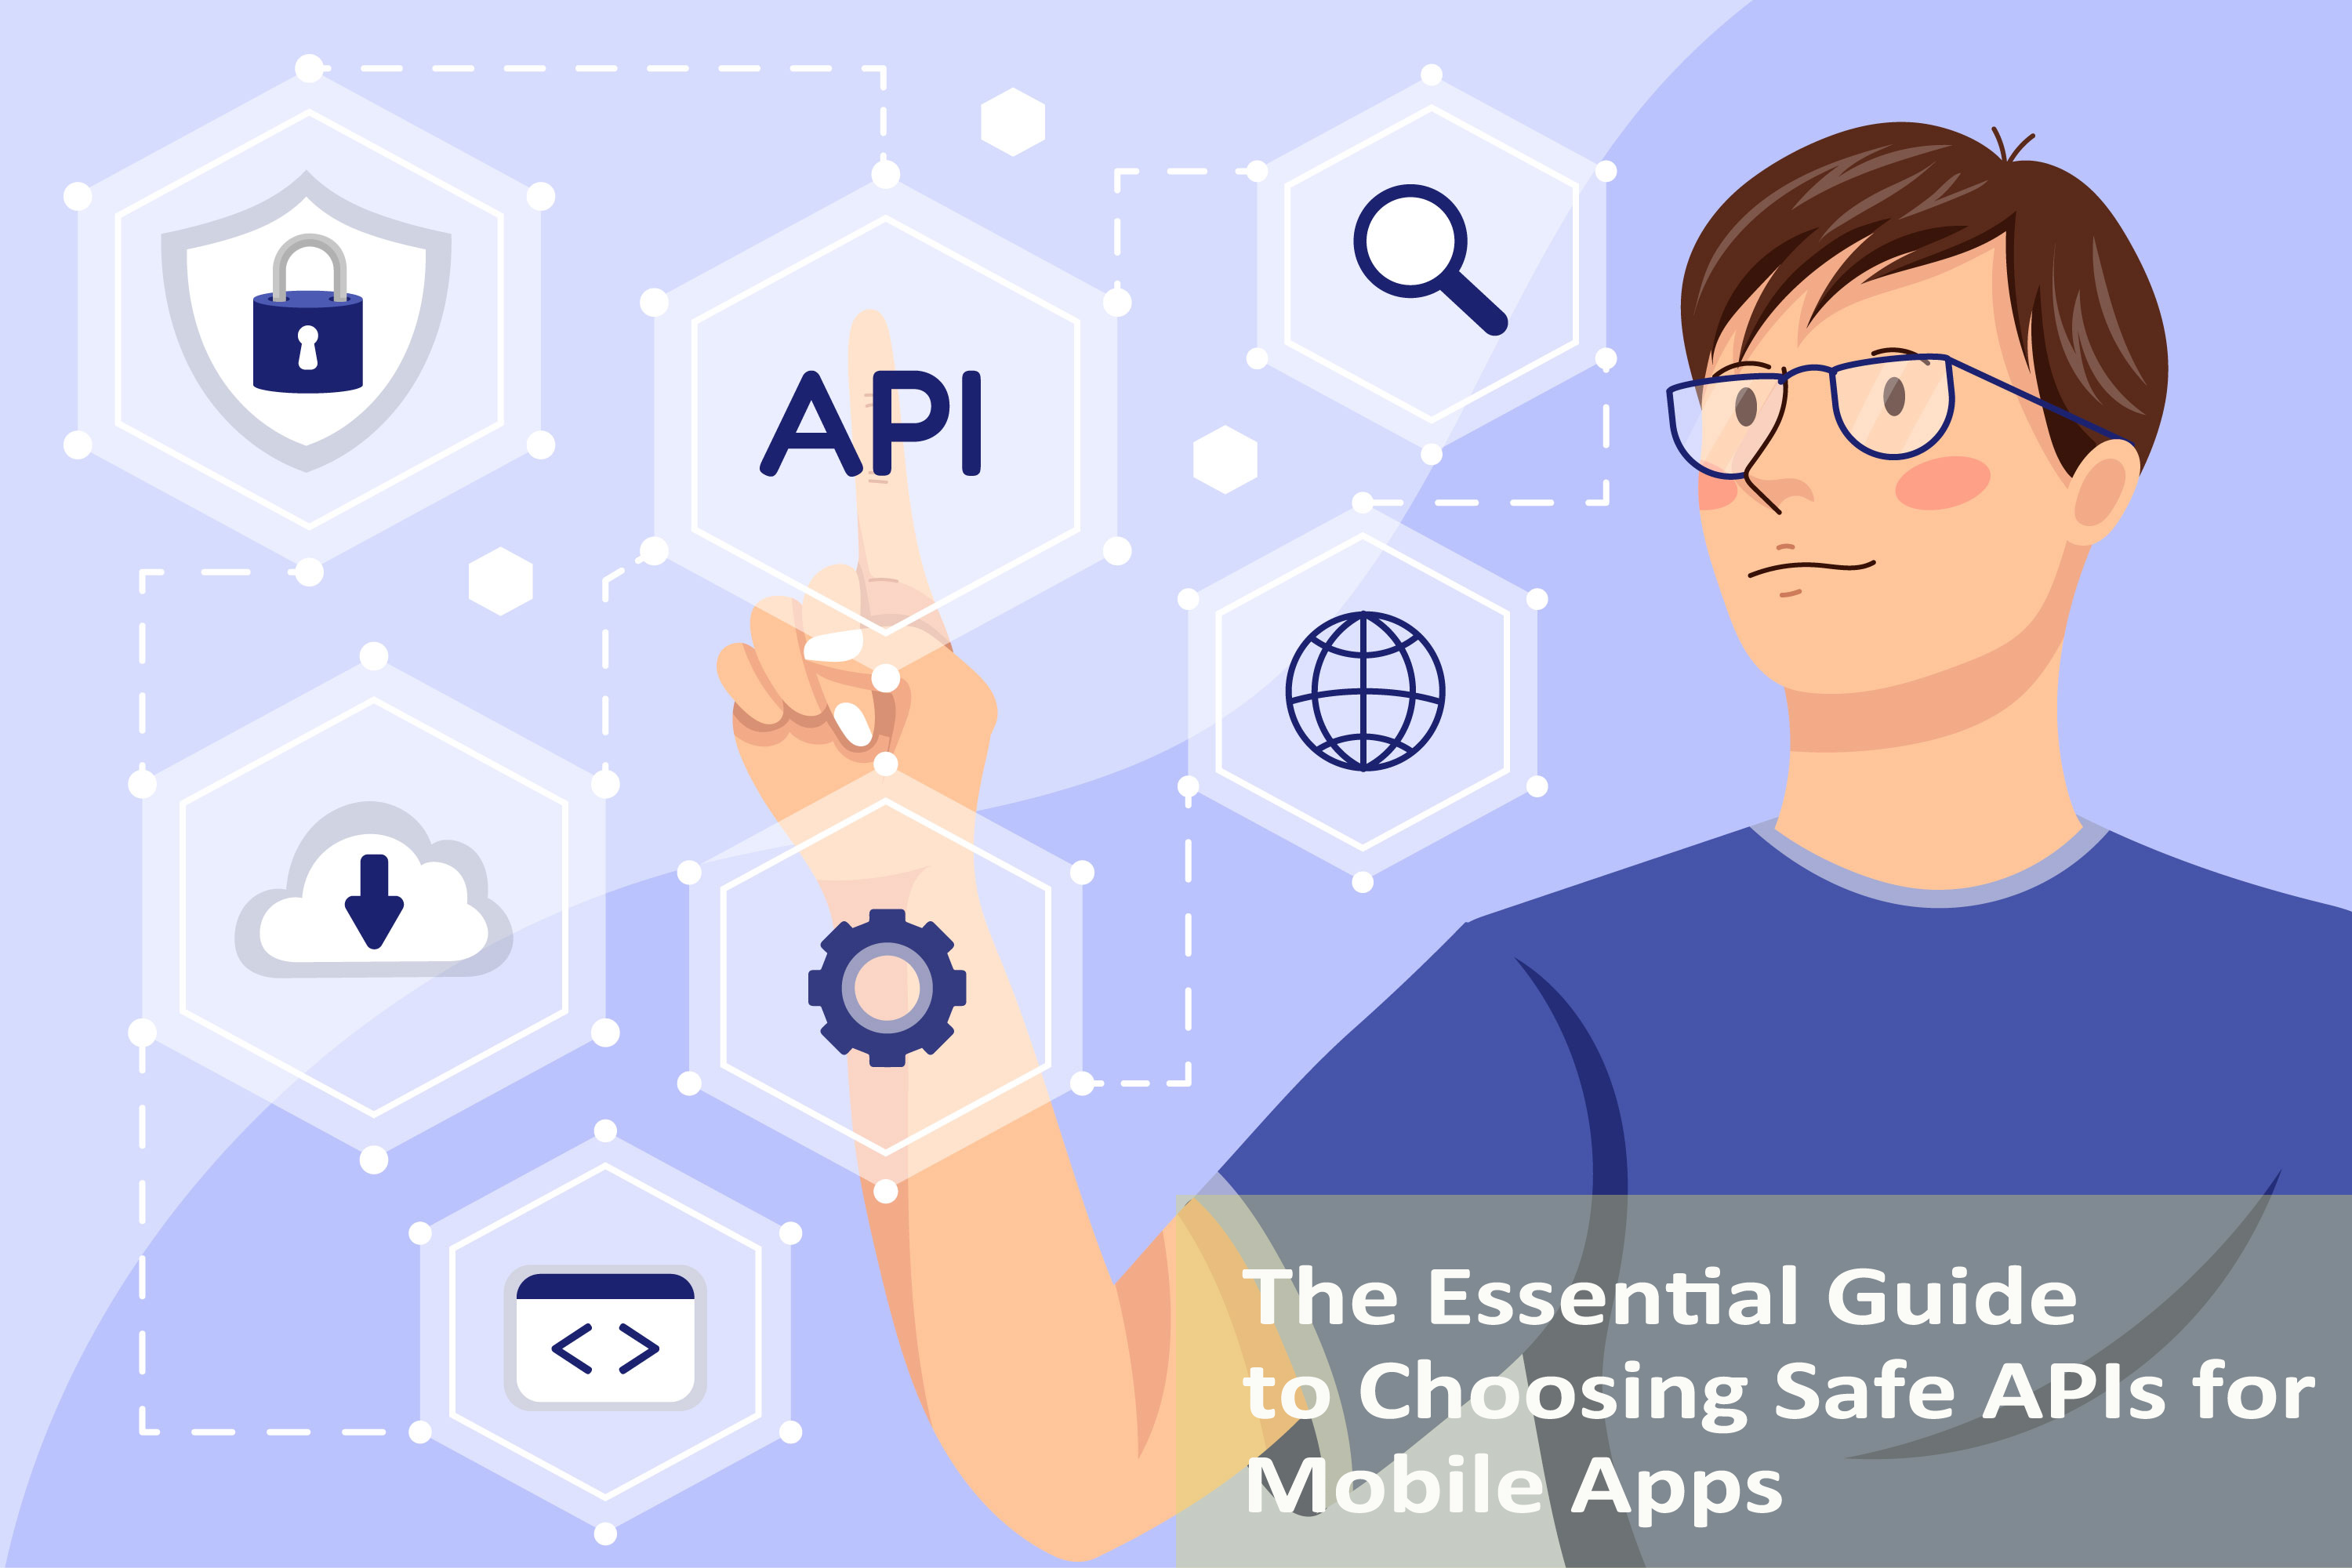 The Essential Guide to Choosing Safe APIs for Mobile Apps